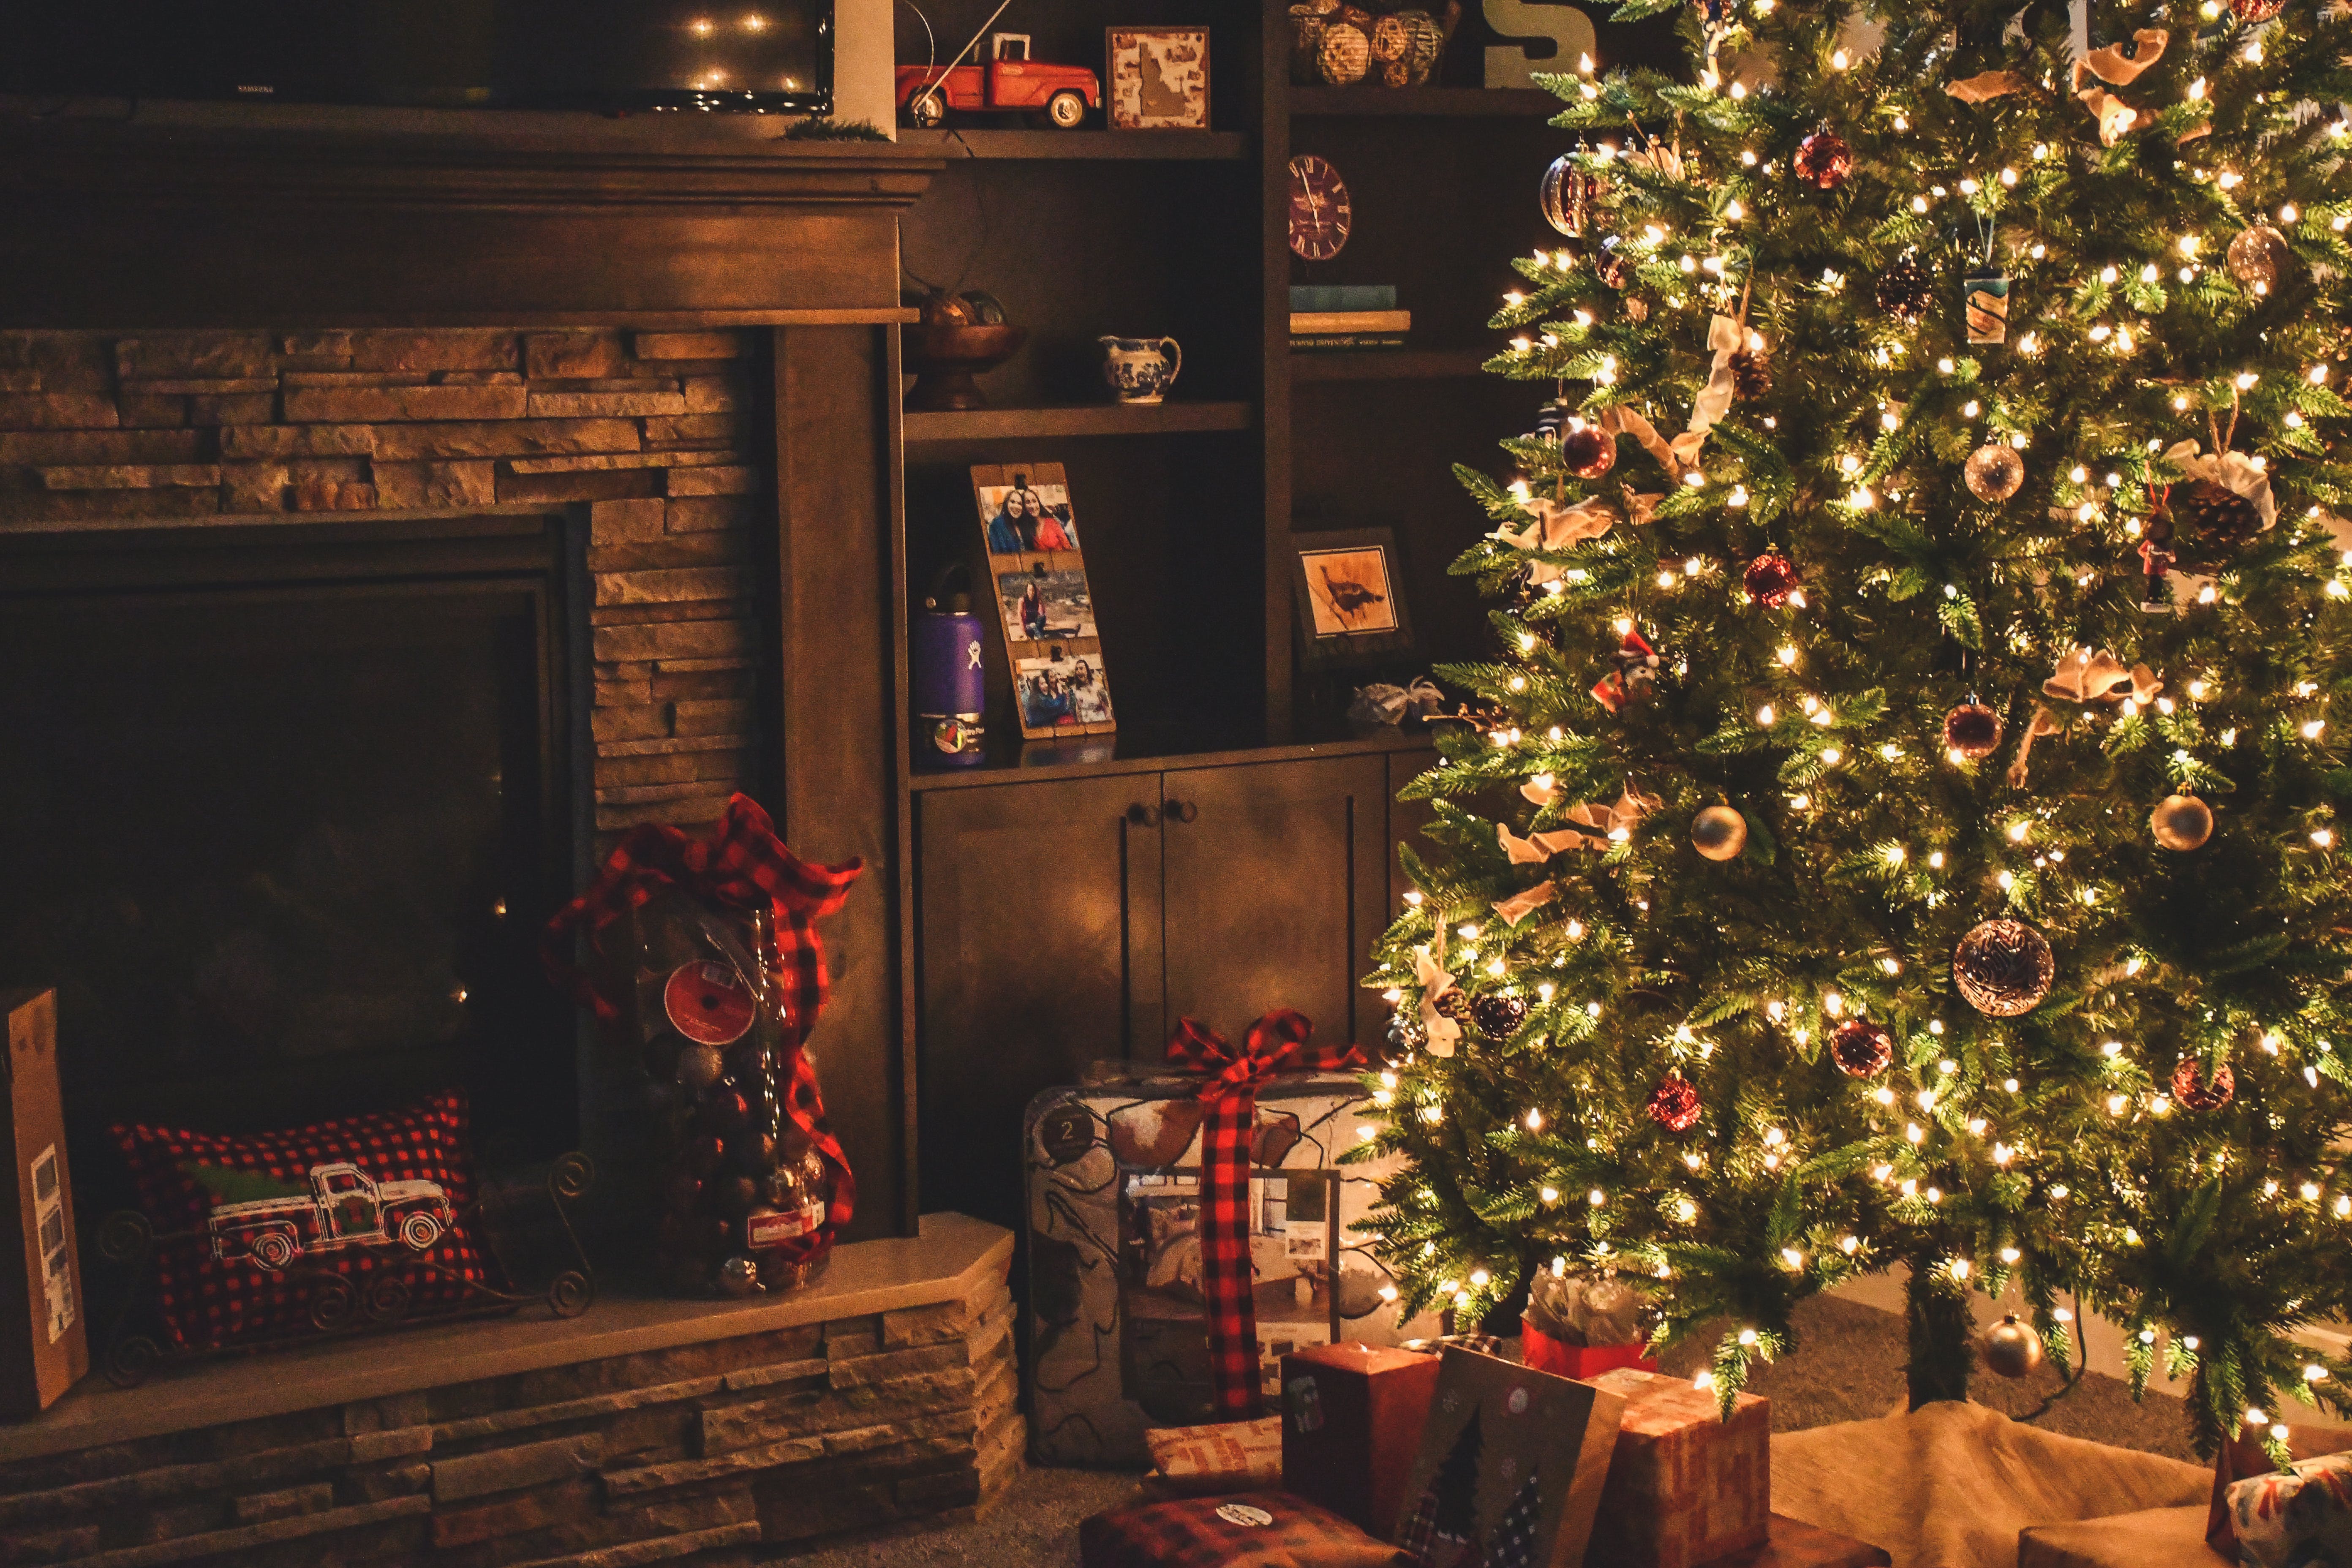 Christmas tree with gifts underneath | Source: Pexels